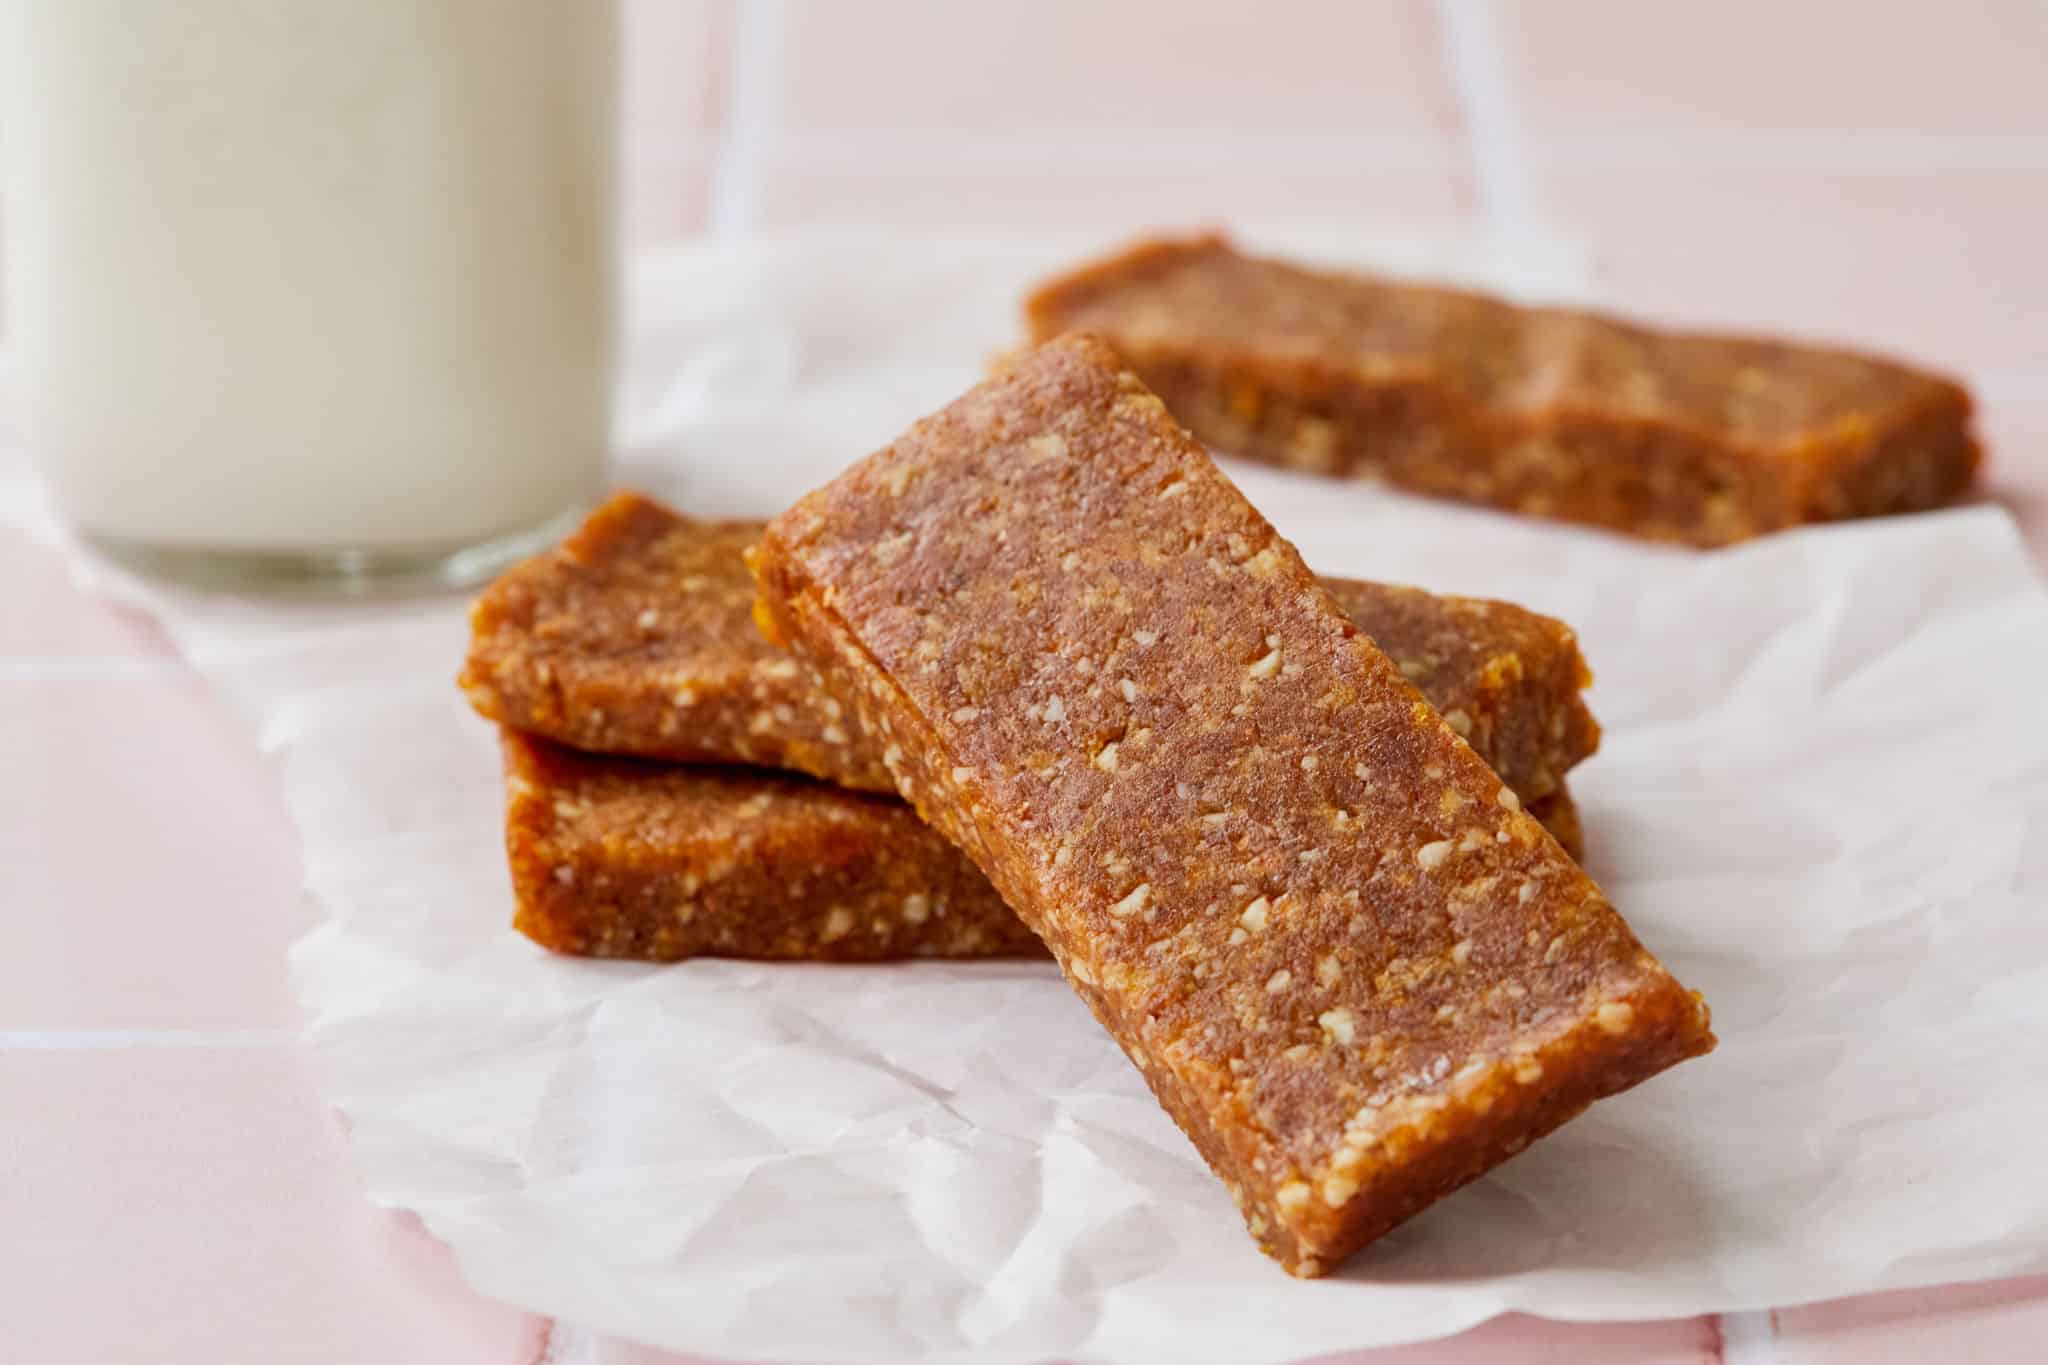 Four homemade Larabars made with three ingredients sit on a table next to a glass of milk.